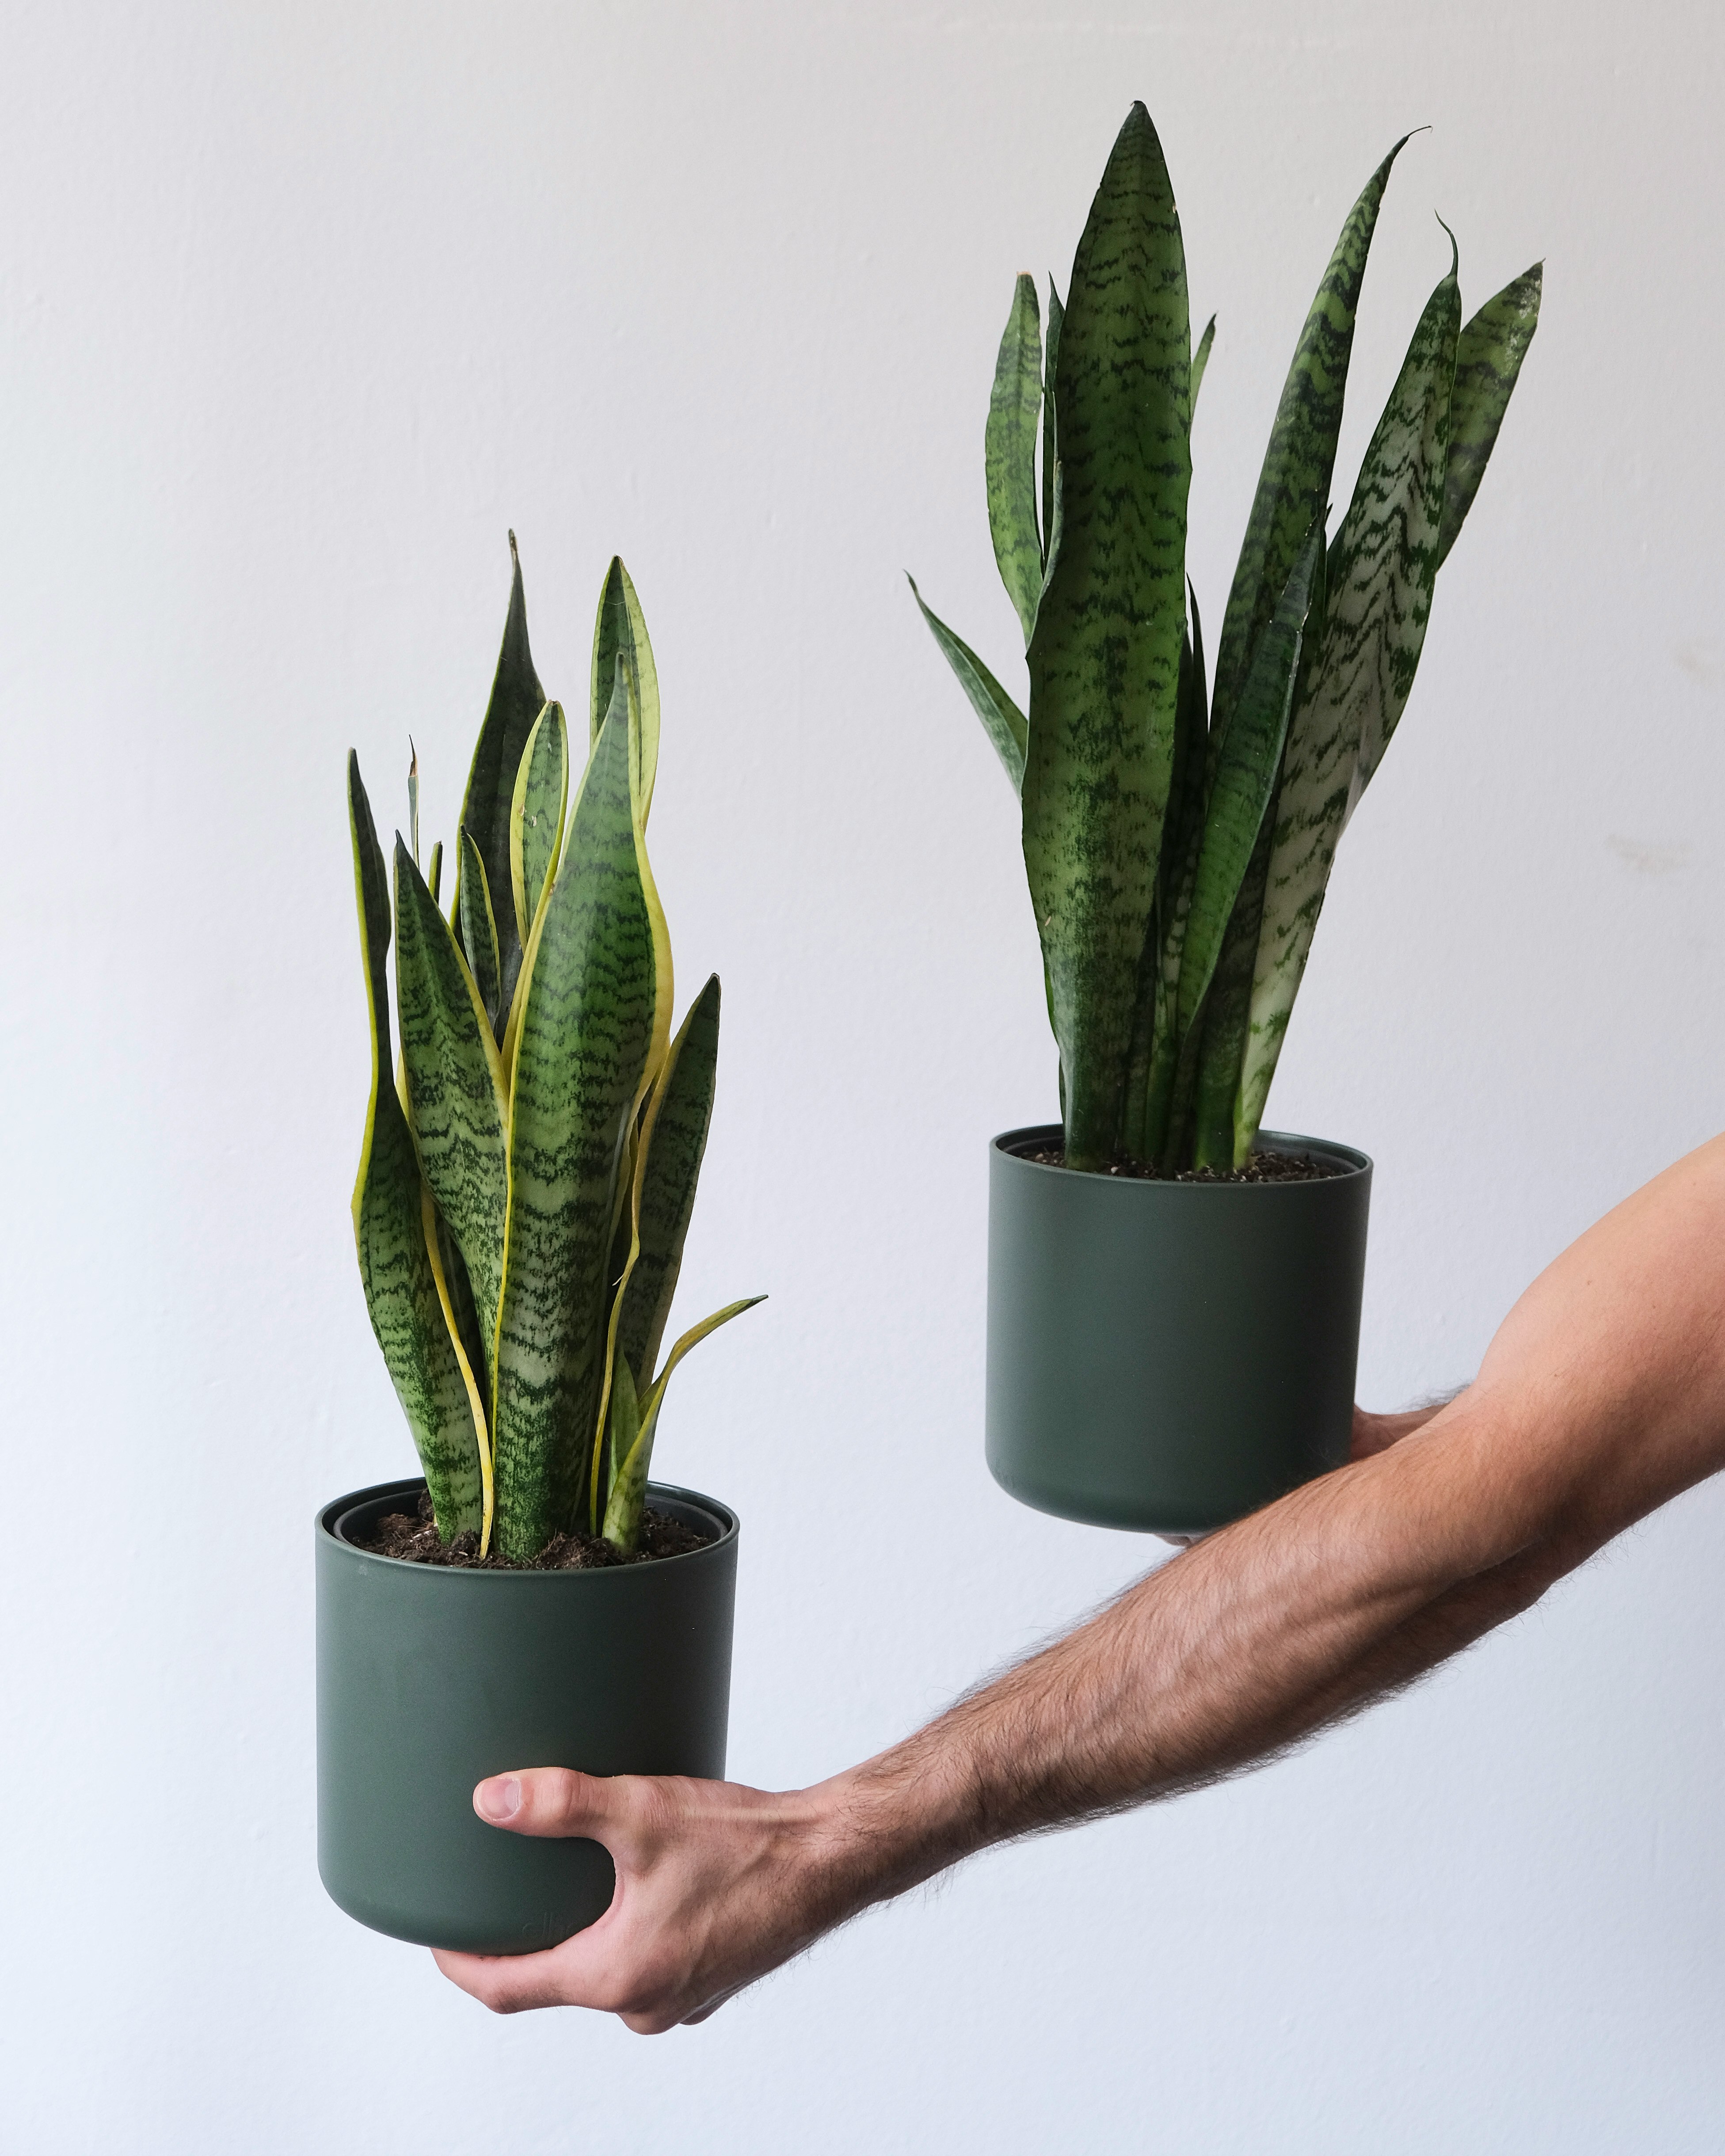 Two hands holding a green/yellow sansevieria and a green one